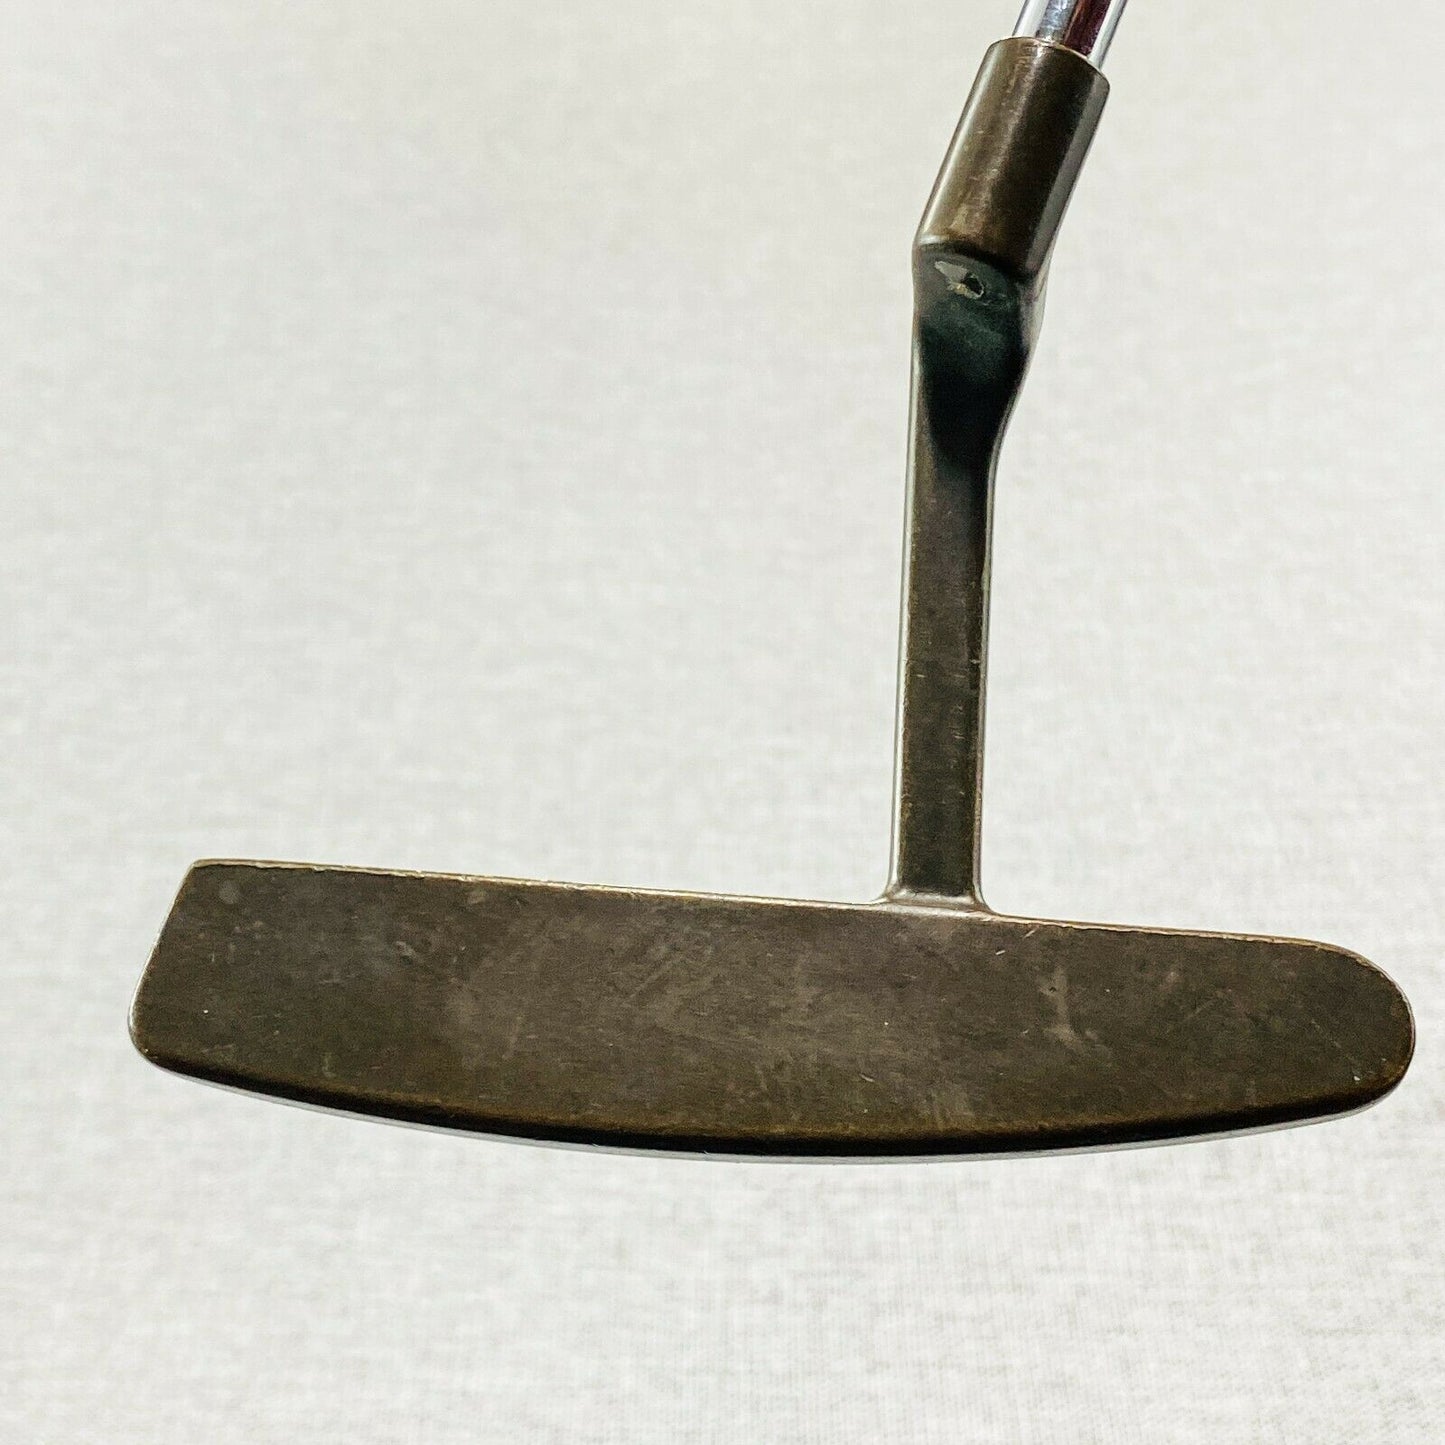 PING Zing 5 Beryllium Copper Putter. 35 inch - Very Good Condition # 11204